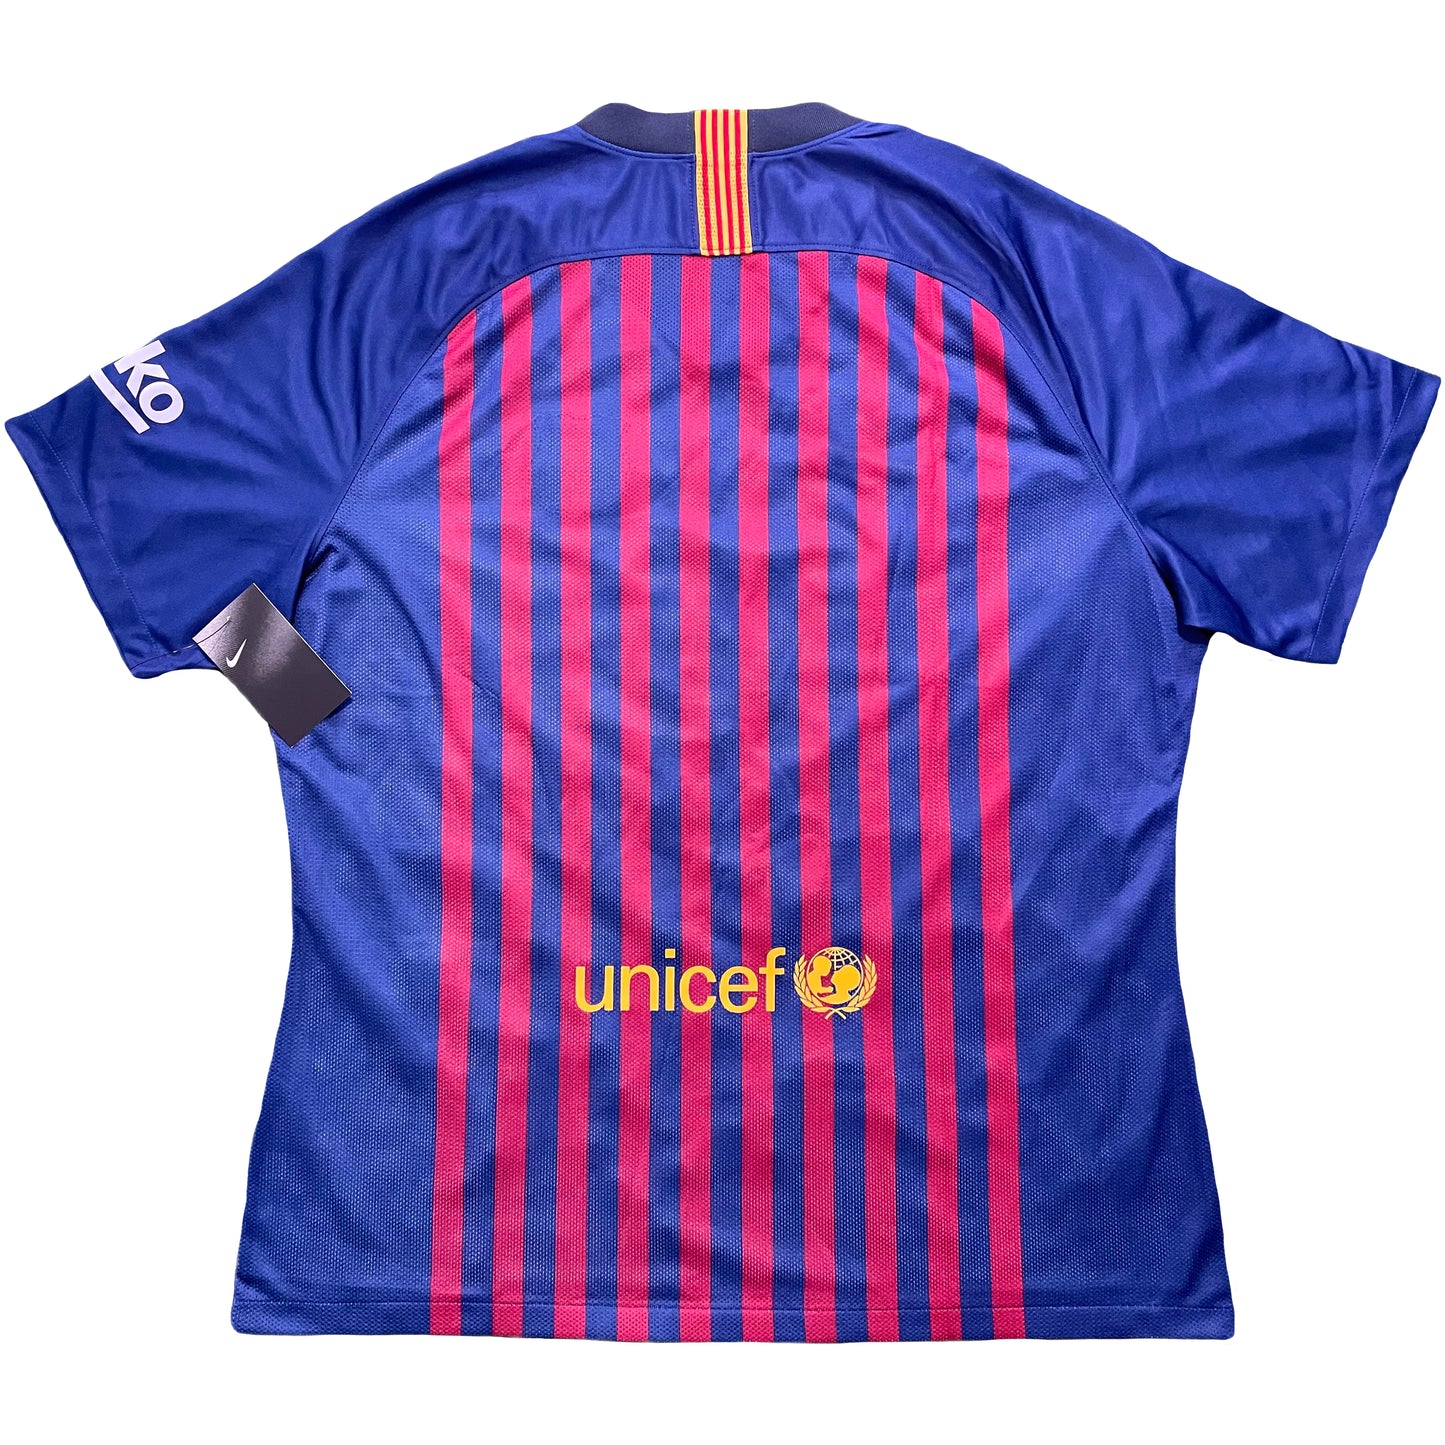 2018-2019 FC Barcelona youth team player issue home shirt (XXL)